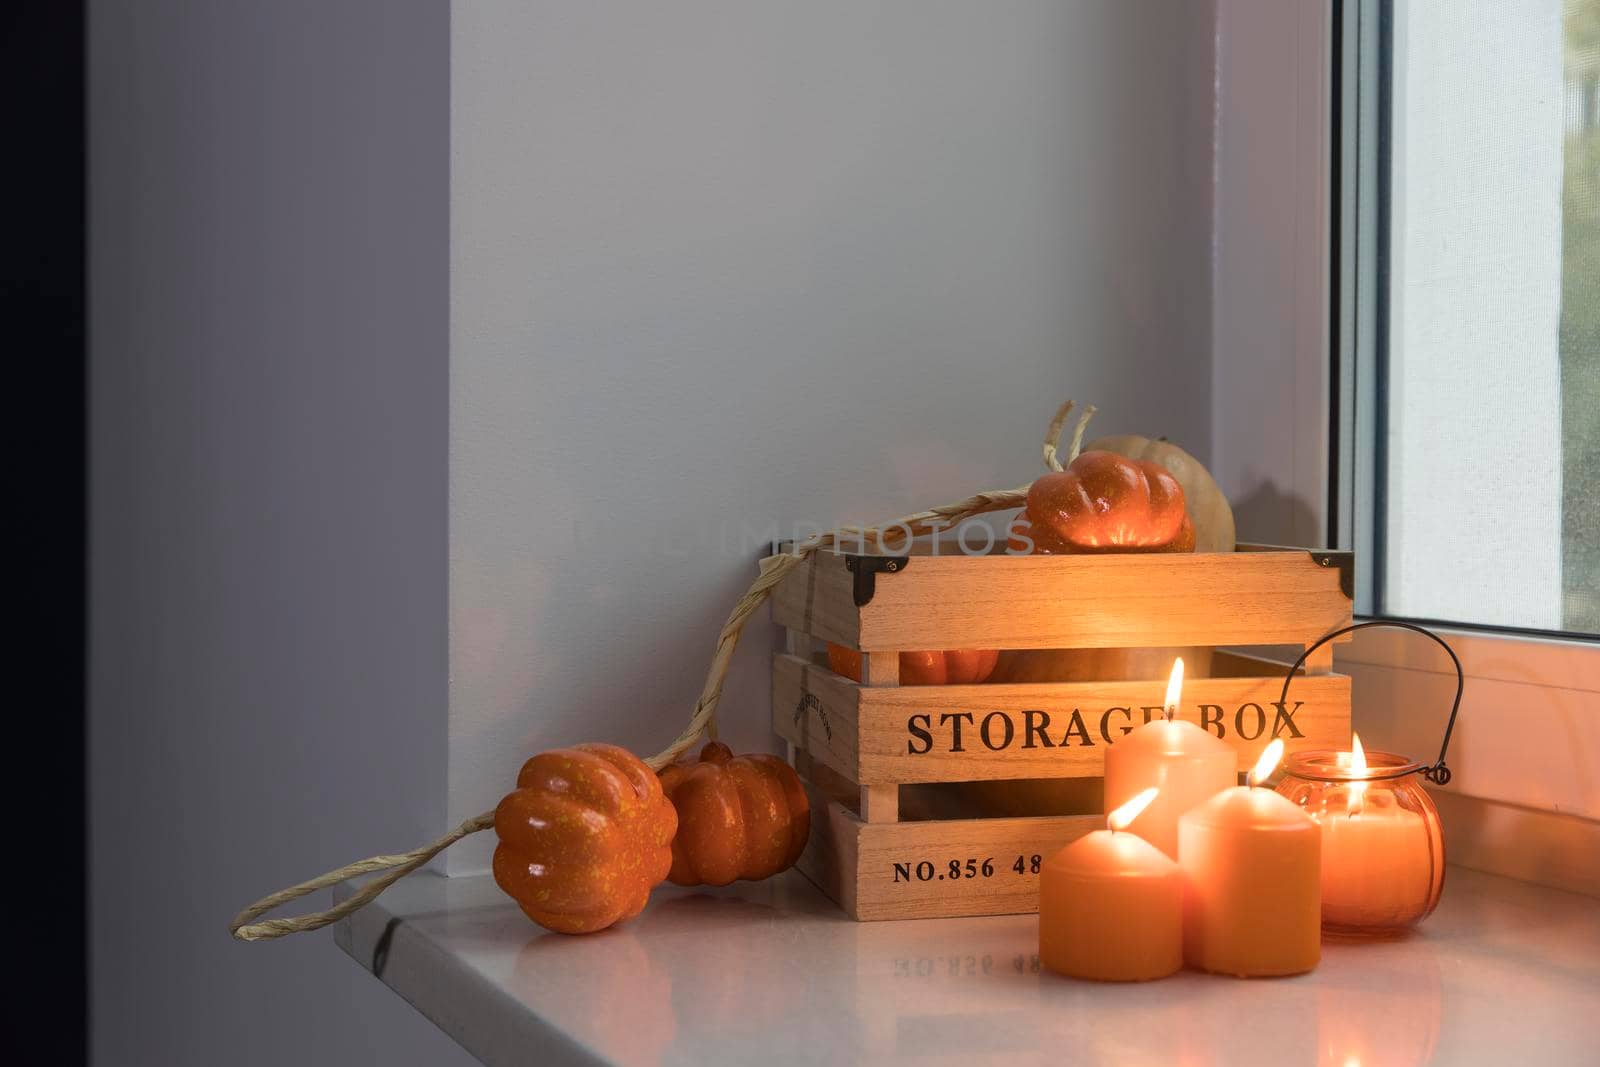 Preparing your home for Halloween. A wooden pumpkin box, faux pumpkin garland, orange candles, a cup of tea and a candle lantern decorate the window. by elenarostunova